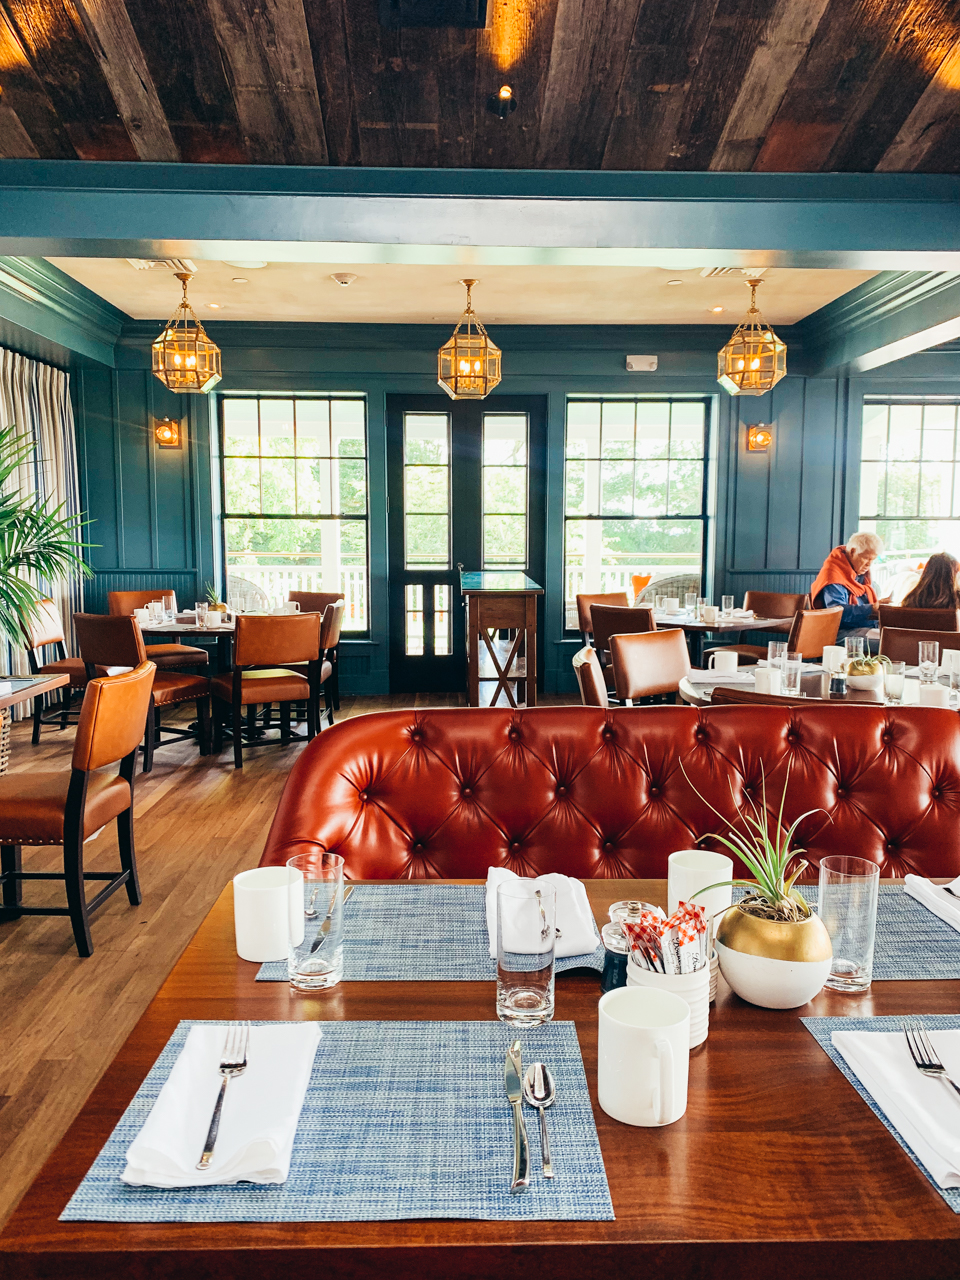 Bettini's | New England Foodie Guide: Top 8 Restaurants in Martha's Vineyard You Must Try by popular New England Food Blogger, Shannon Shipman: image of the inside of Bettini's in Martha's Vineyard.